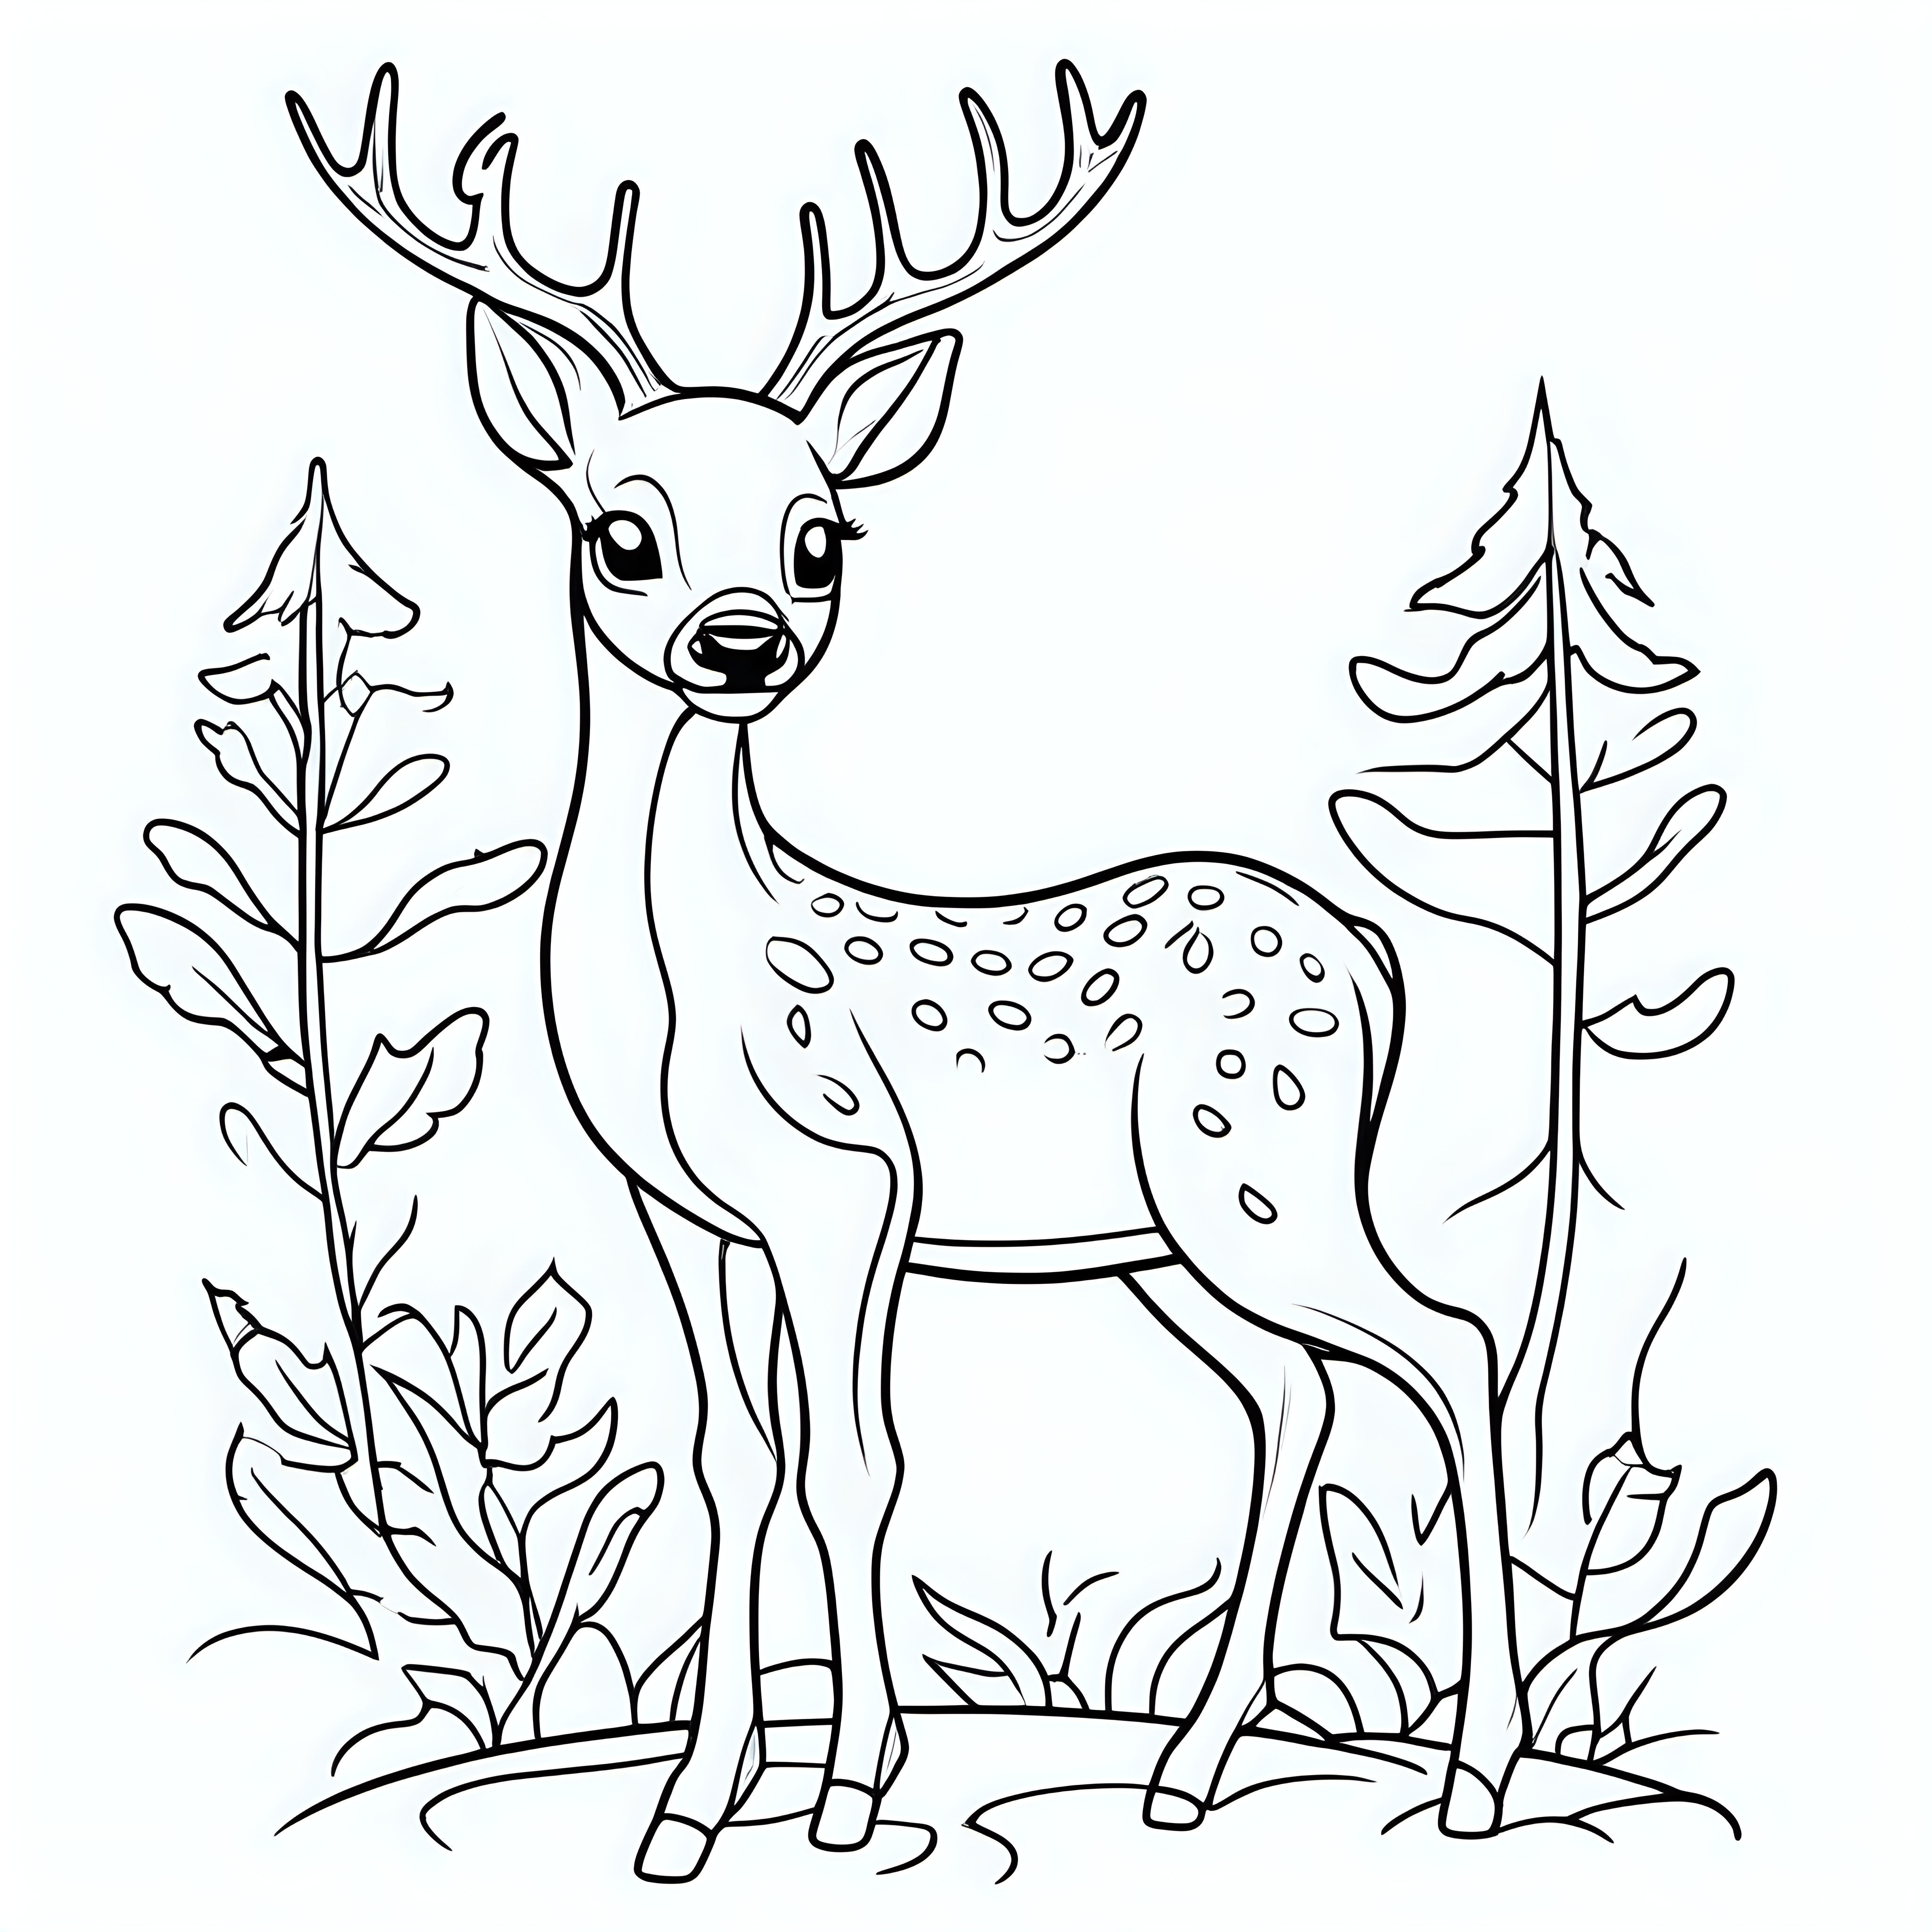 draw a cute deer with only the outline in black for a coloring book for kids